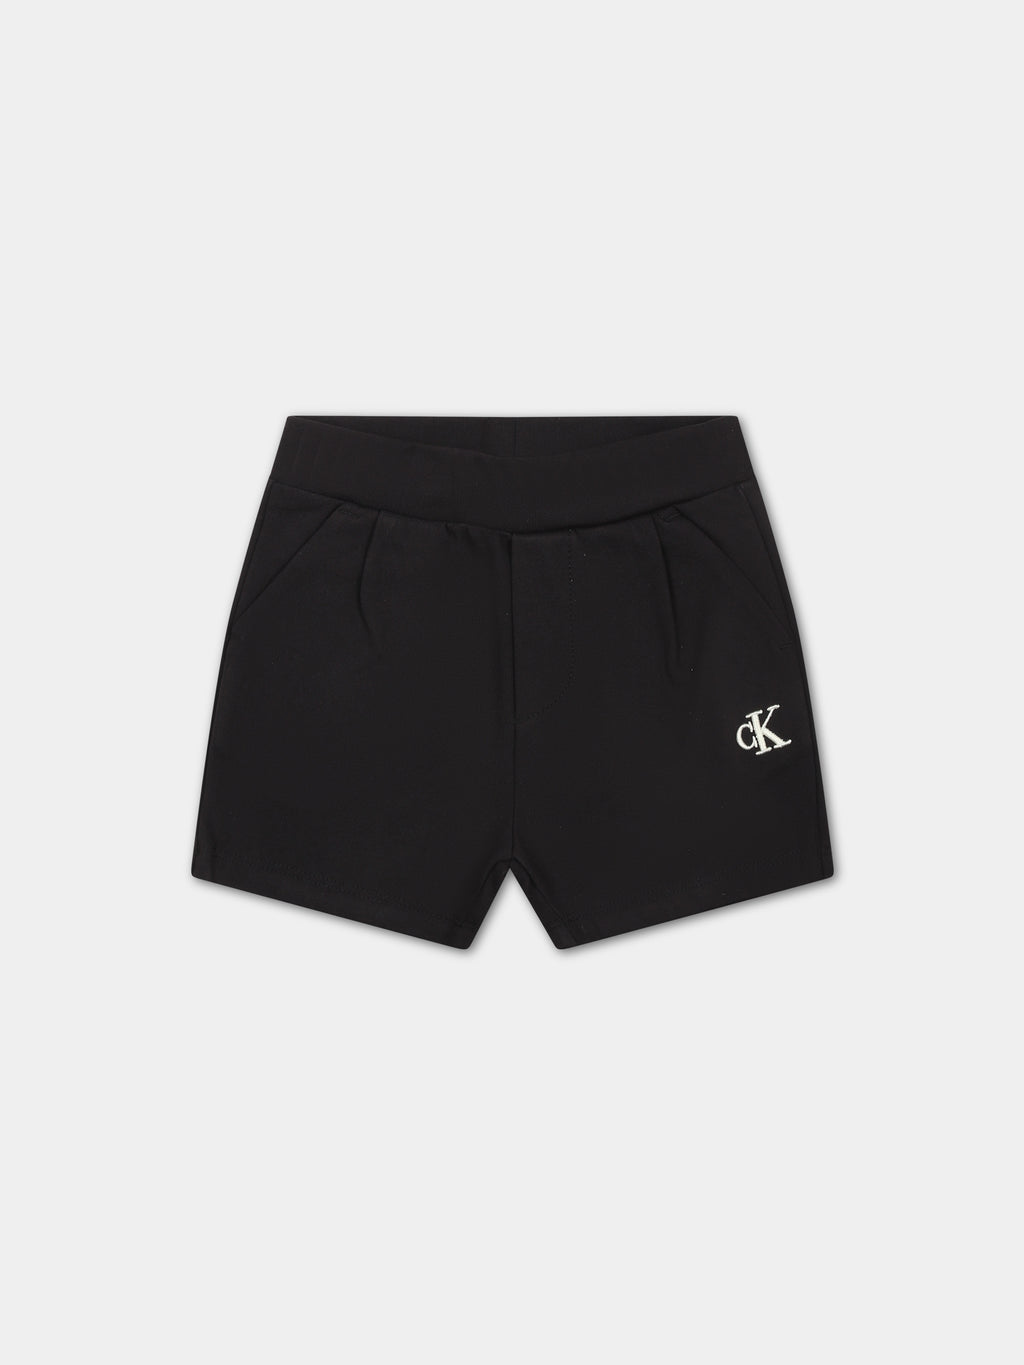 Black sports shorts for baby boy with logo